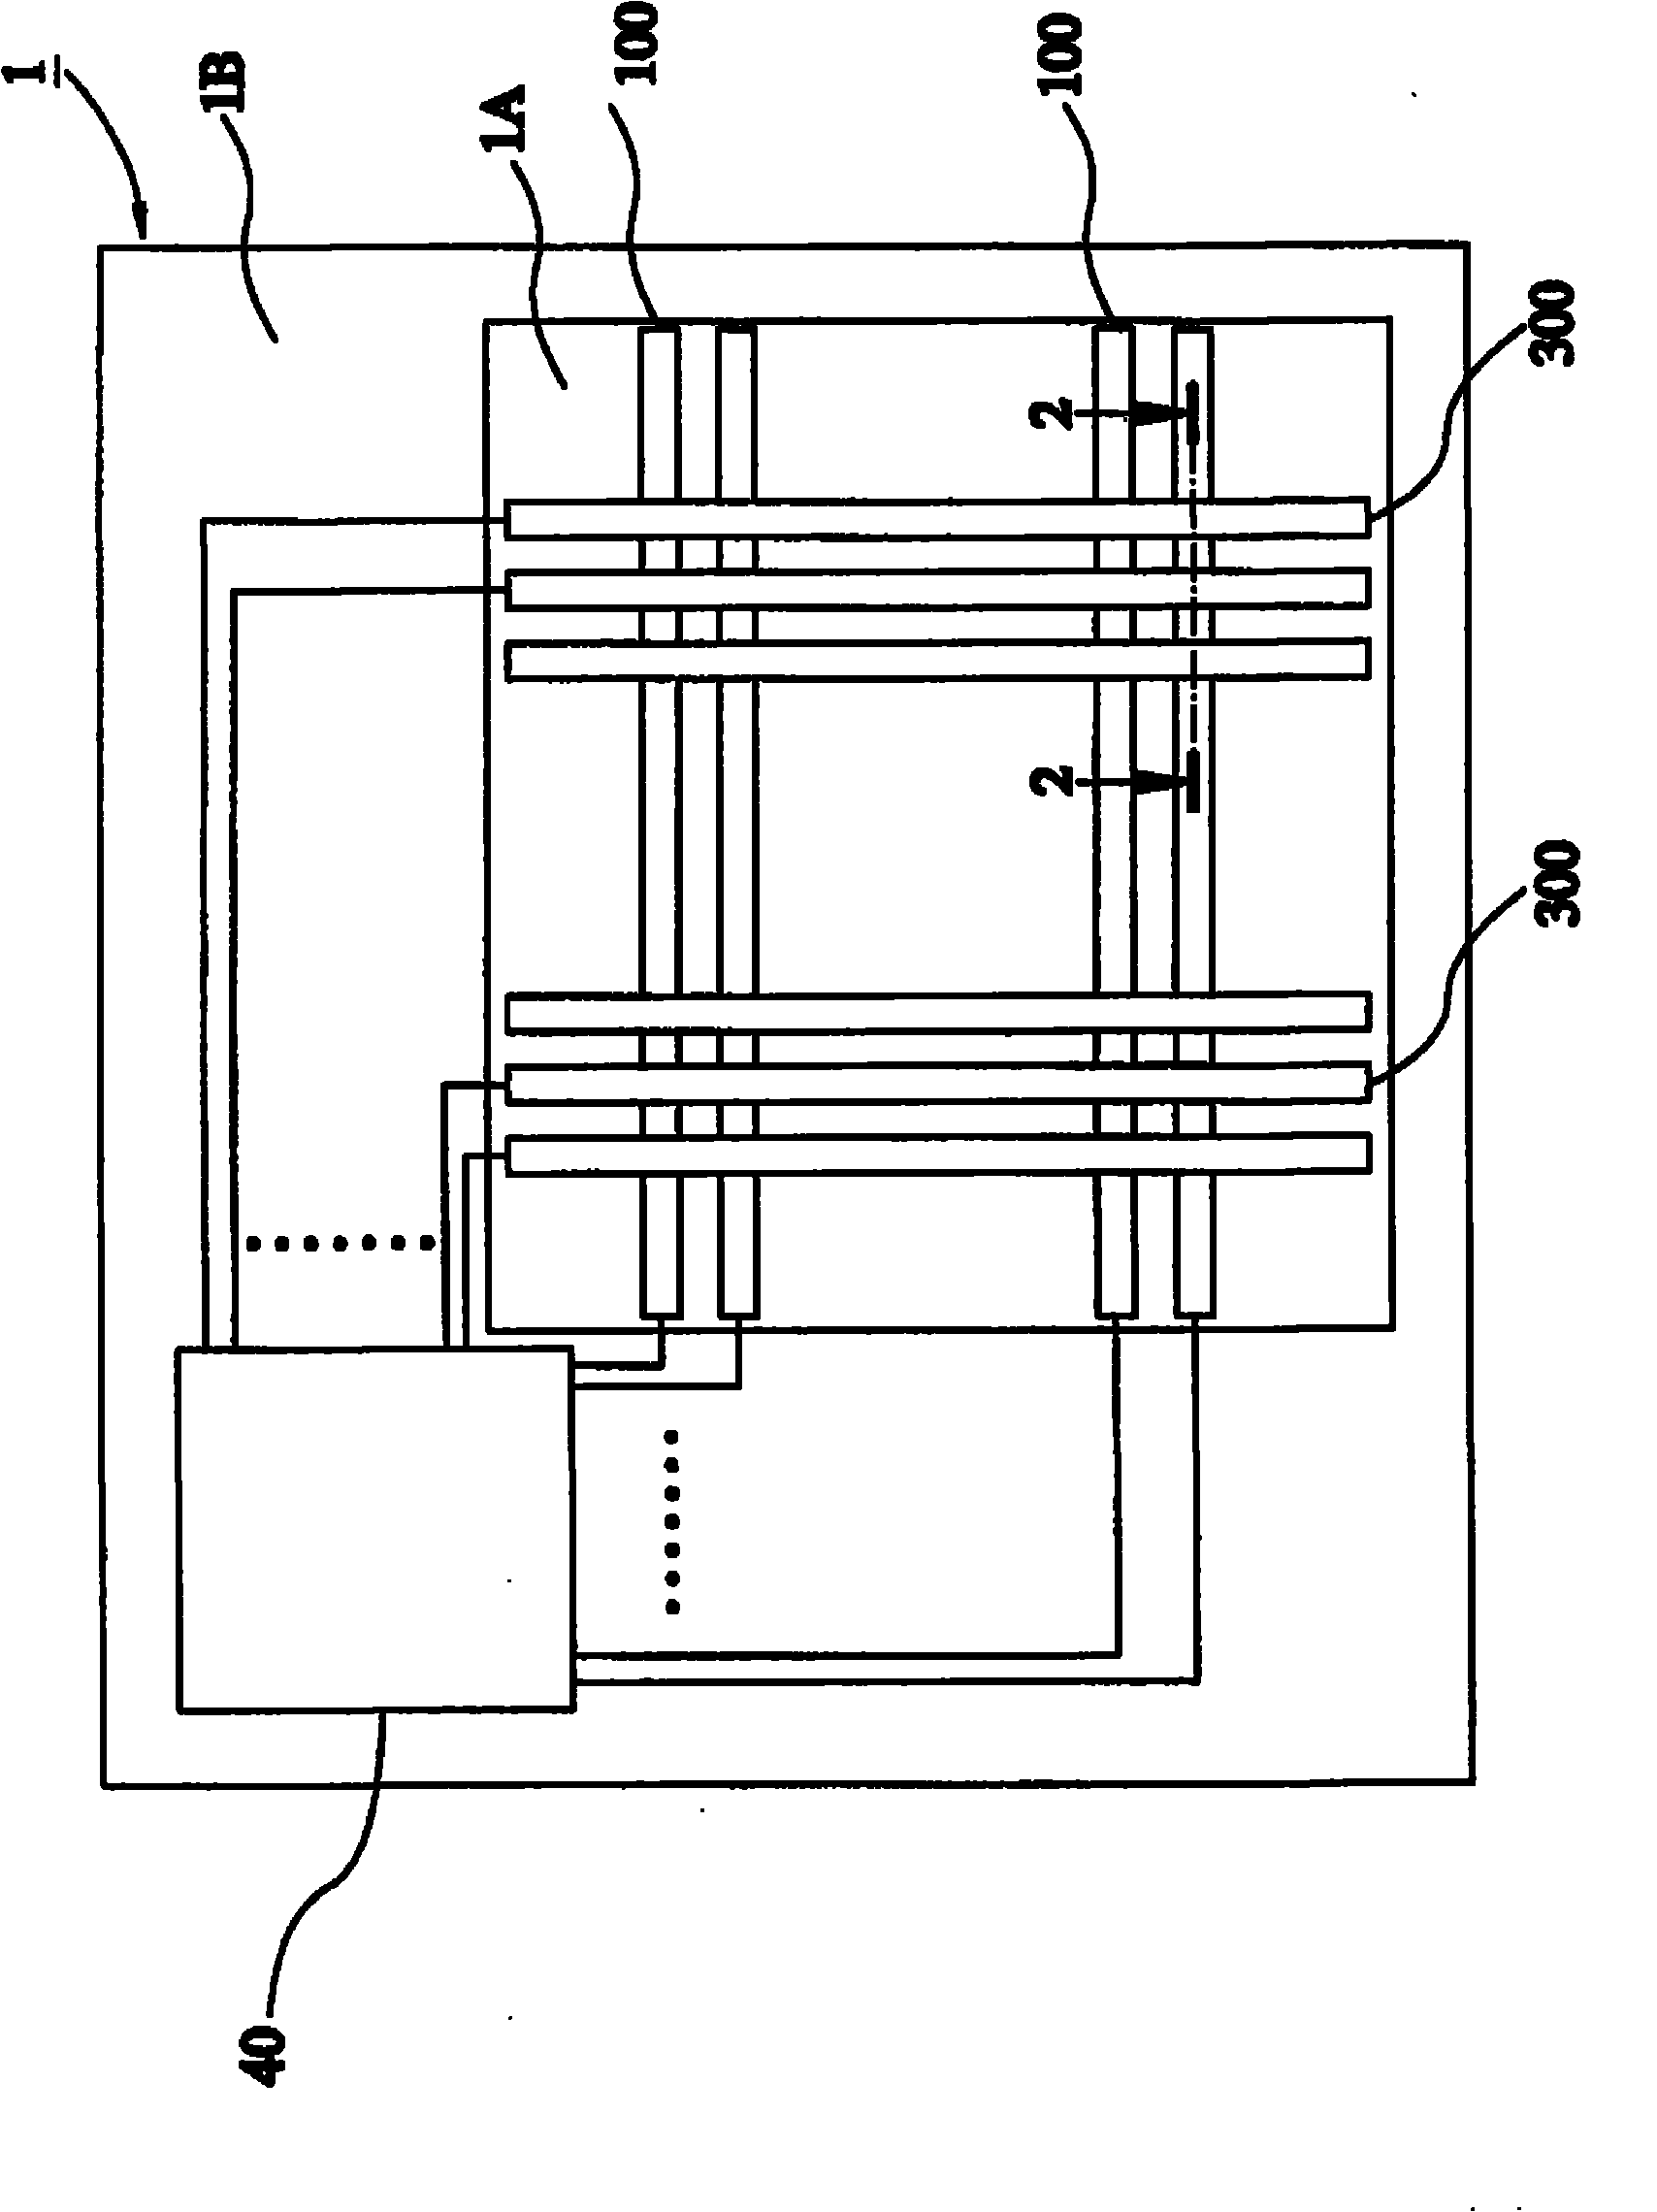 Multipoint sensing method of capacitance-type touch panel